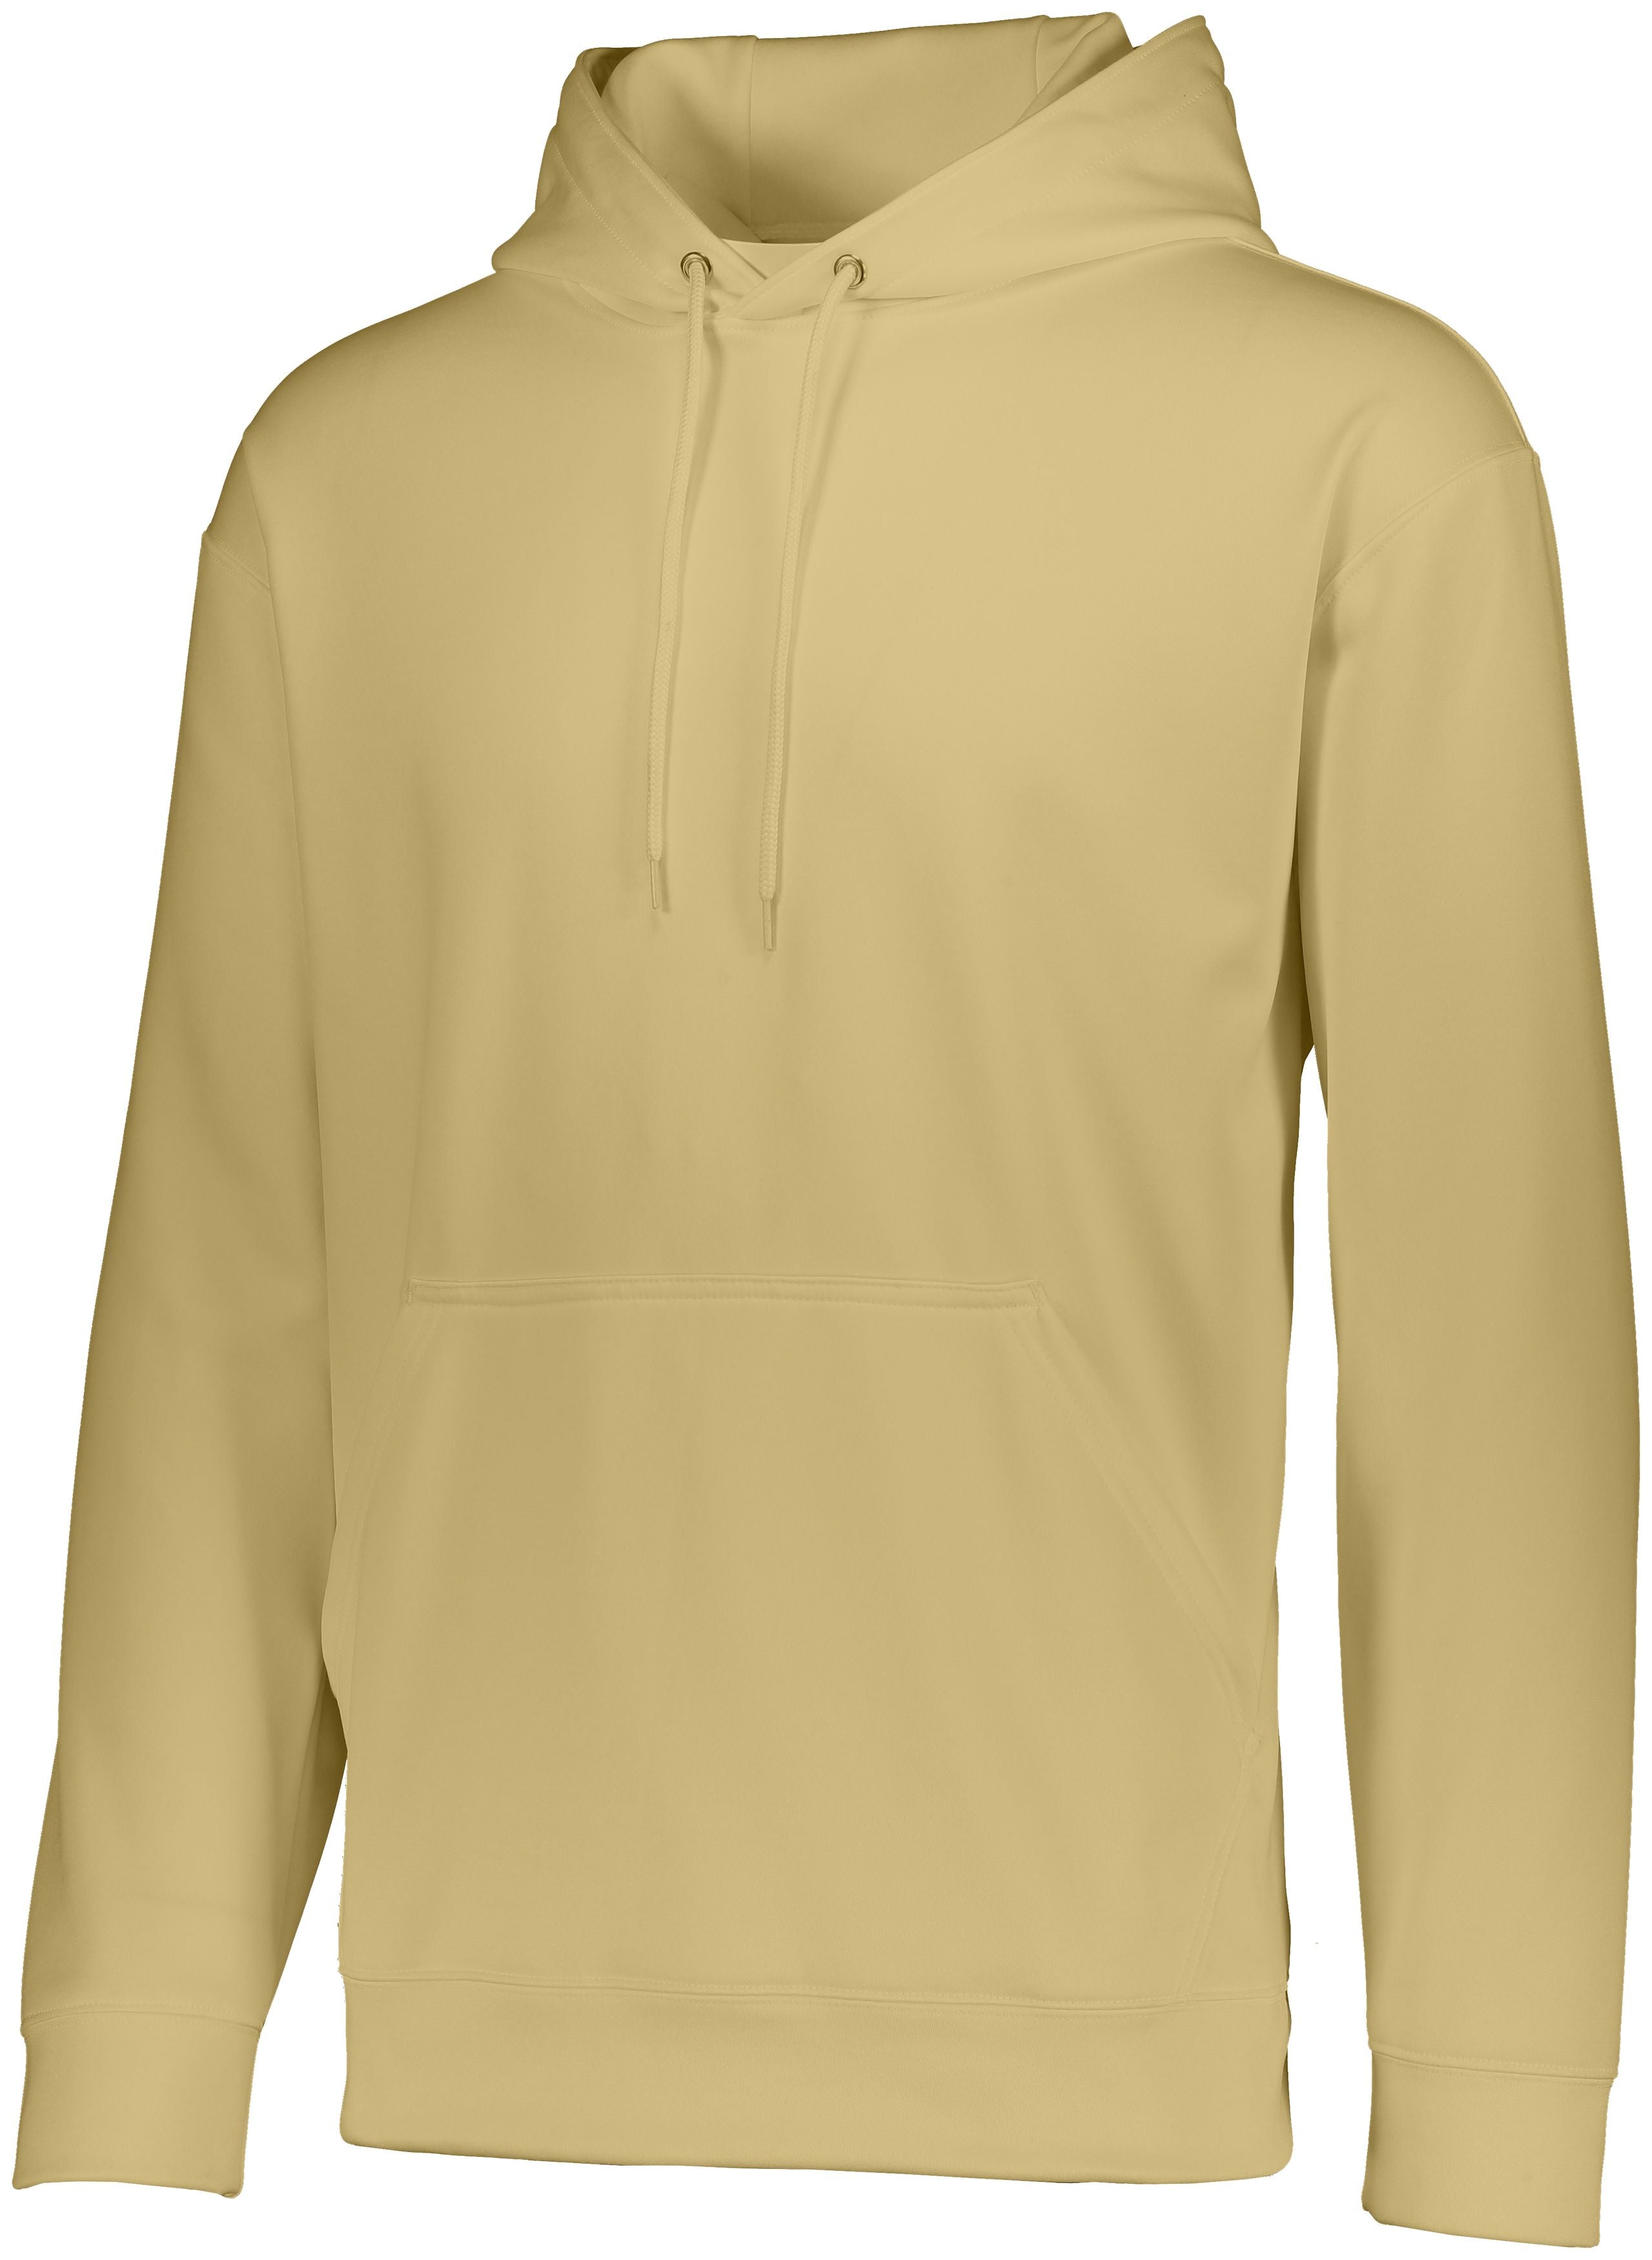 Augusta Sportswear Youth Wicking  Fleece Hoodie in Vegas Gold  -Part of the Youth, Youth-Sweatshirt, Augusta-Products, Outerwear product lines at KanaleyCreations.com